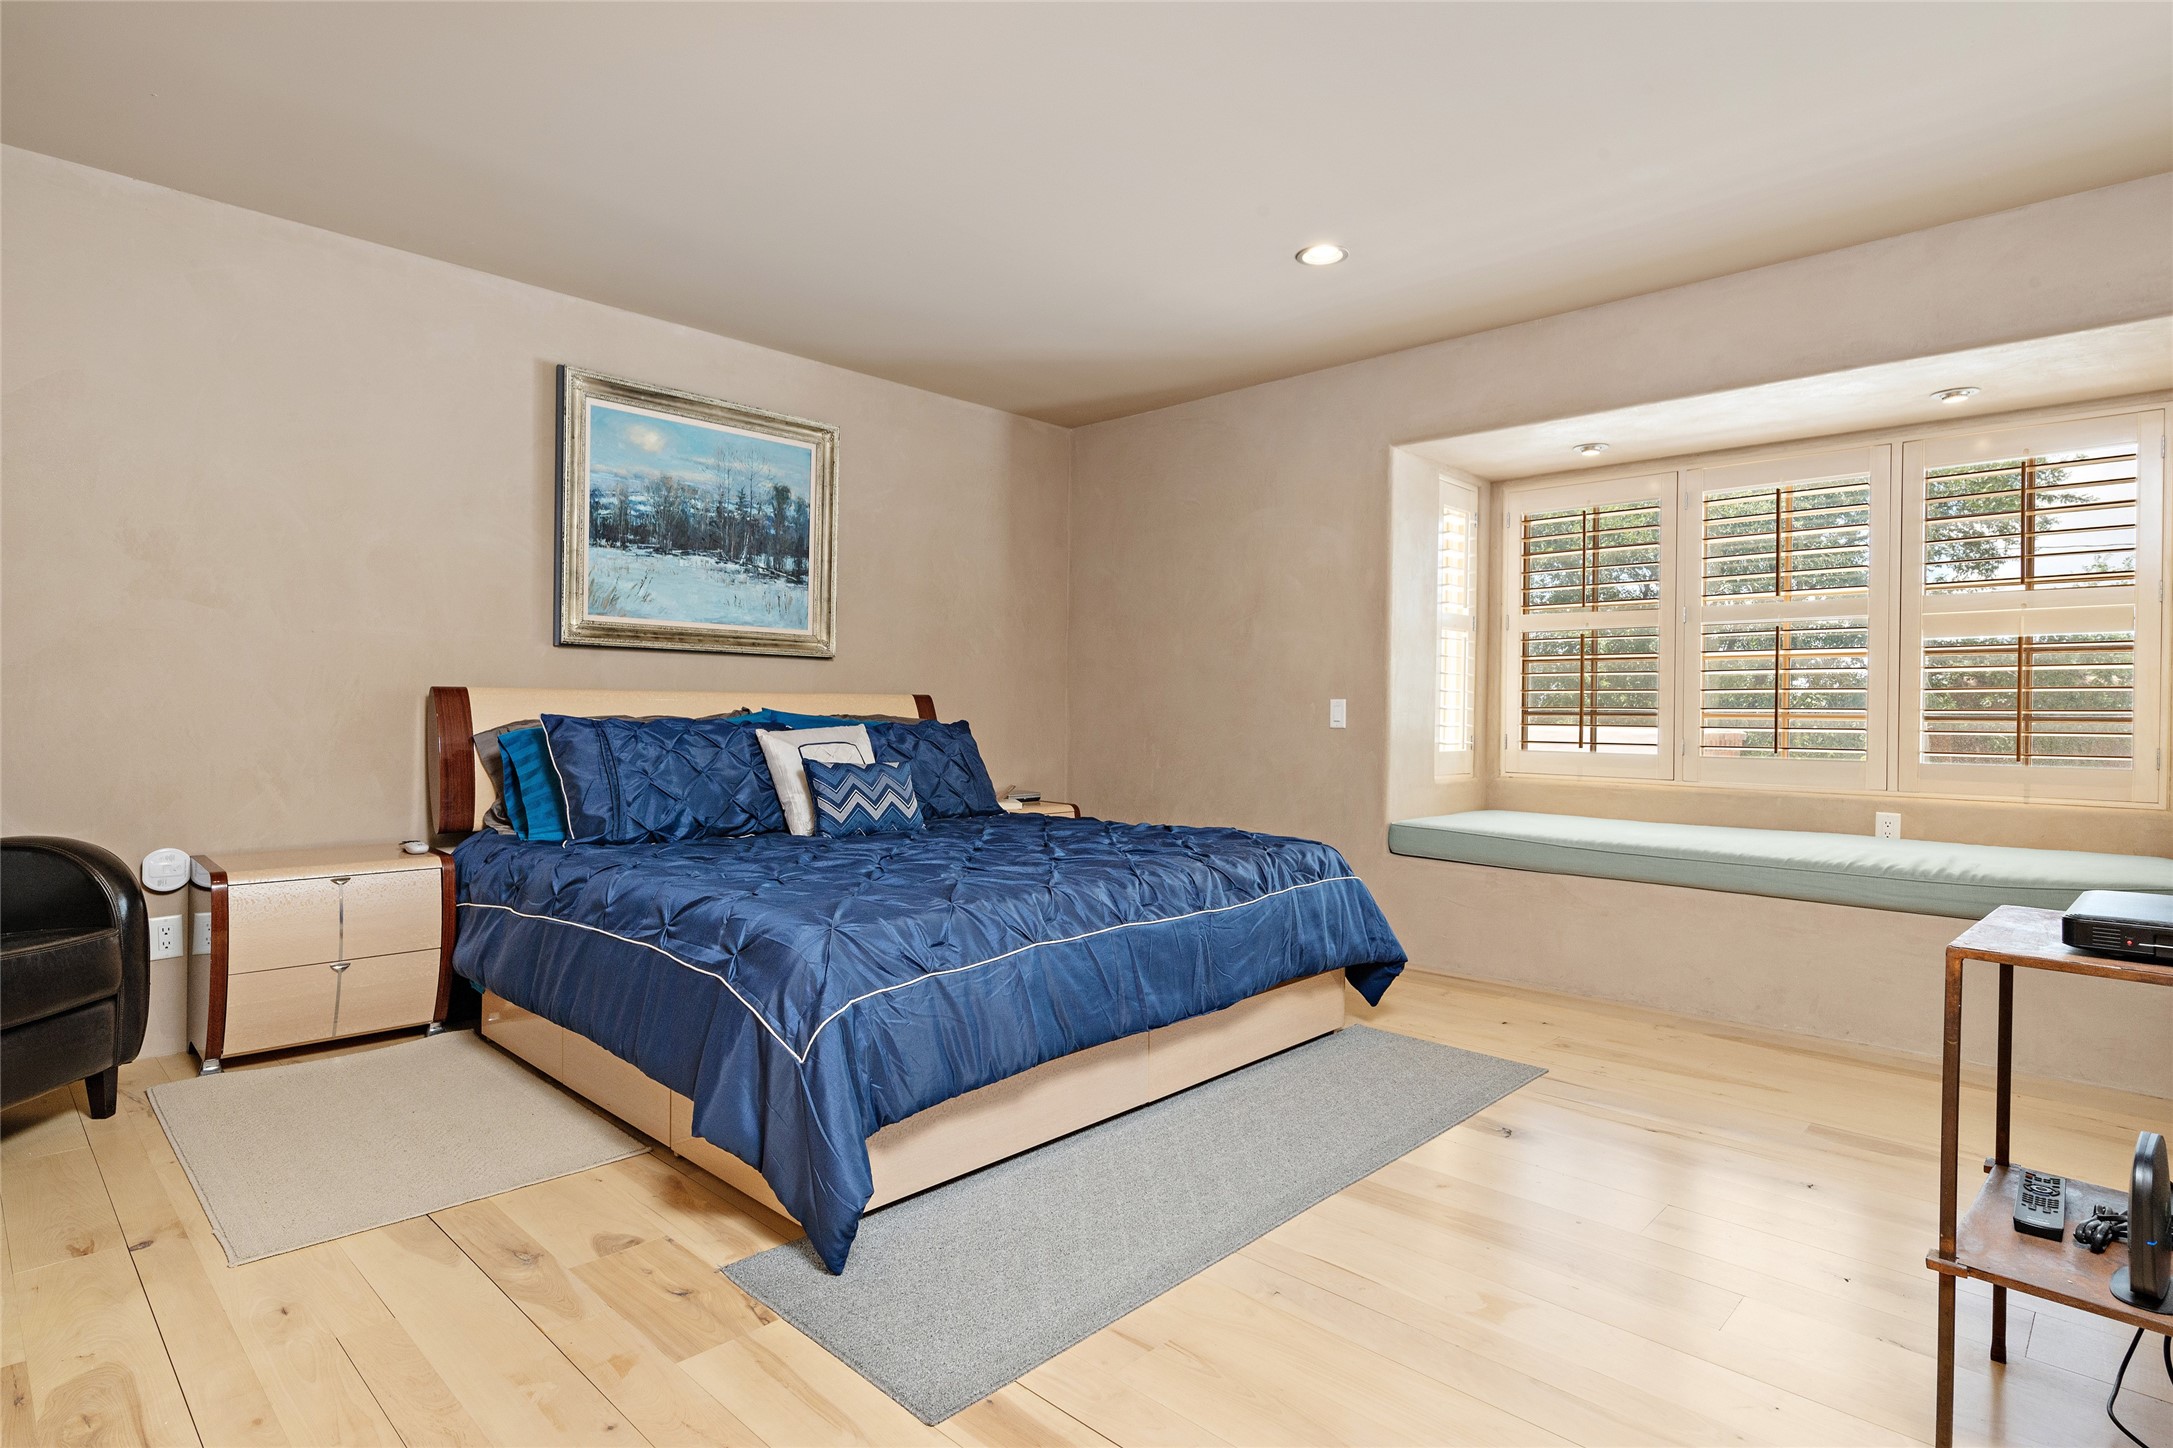 Very spacious primary bedroom open to the trees with hardwood floors and beautiful plaster walls